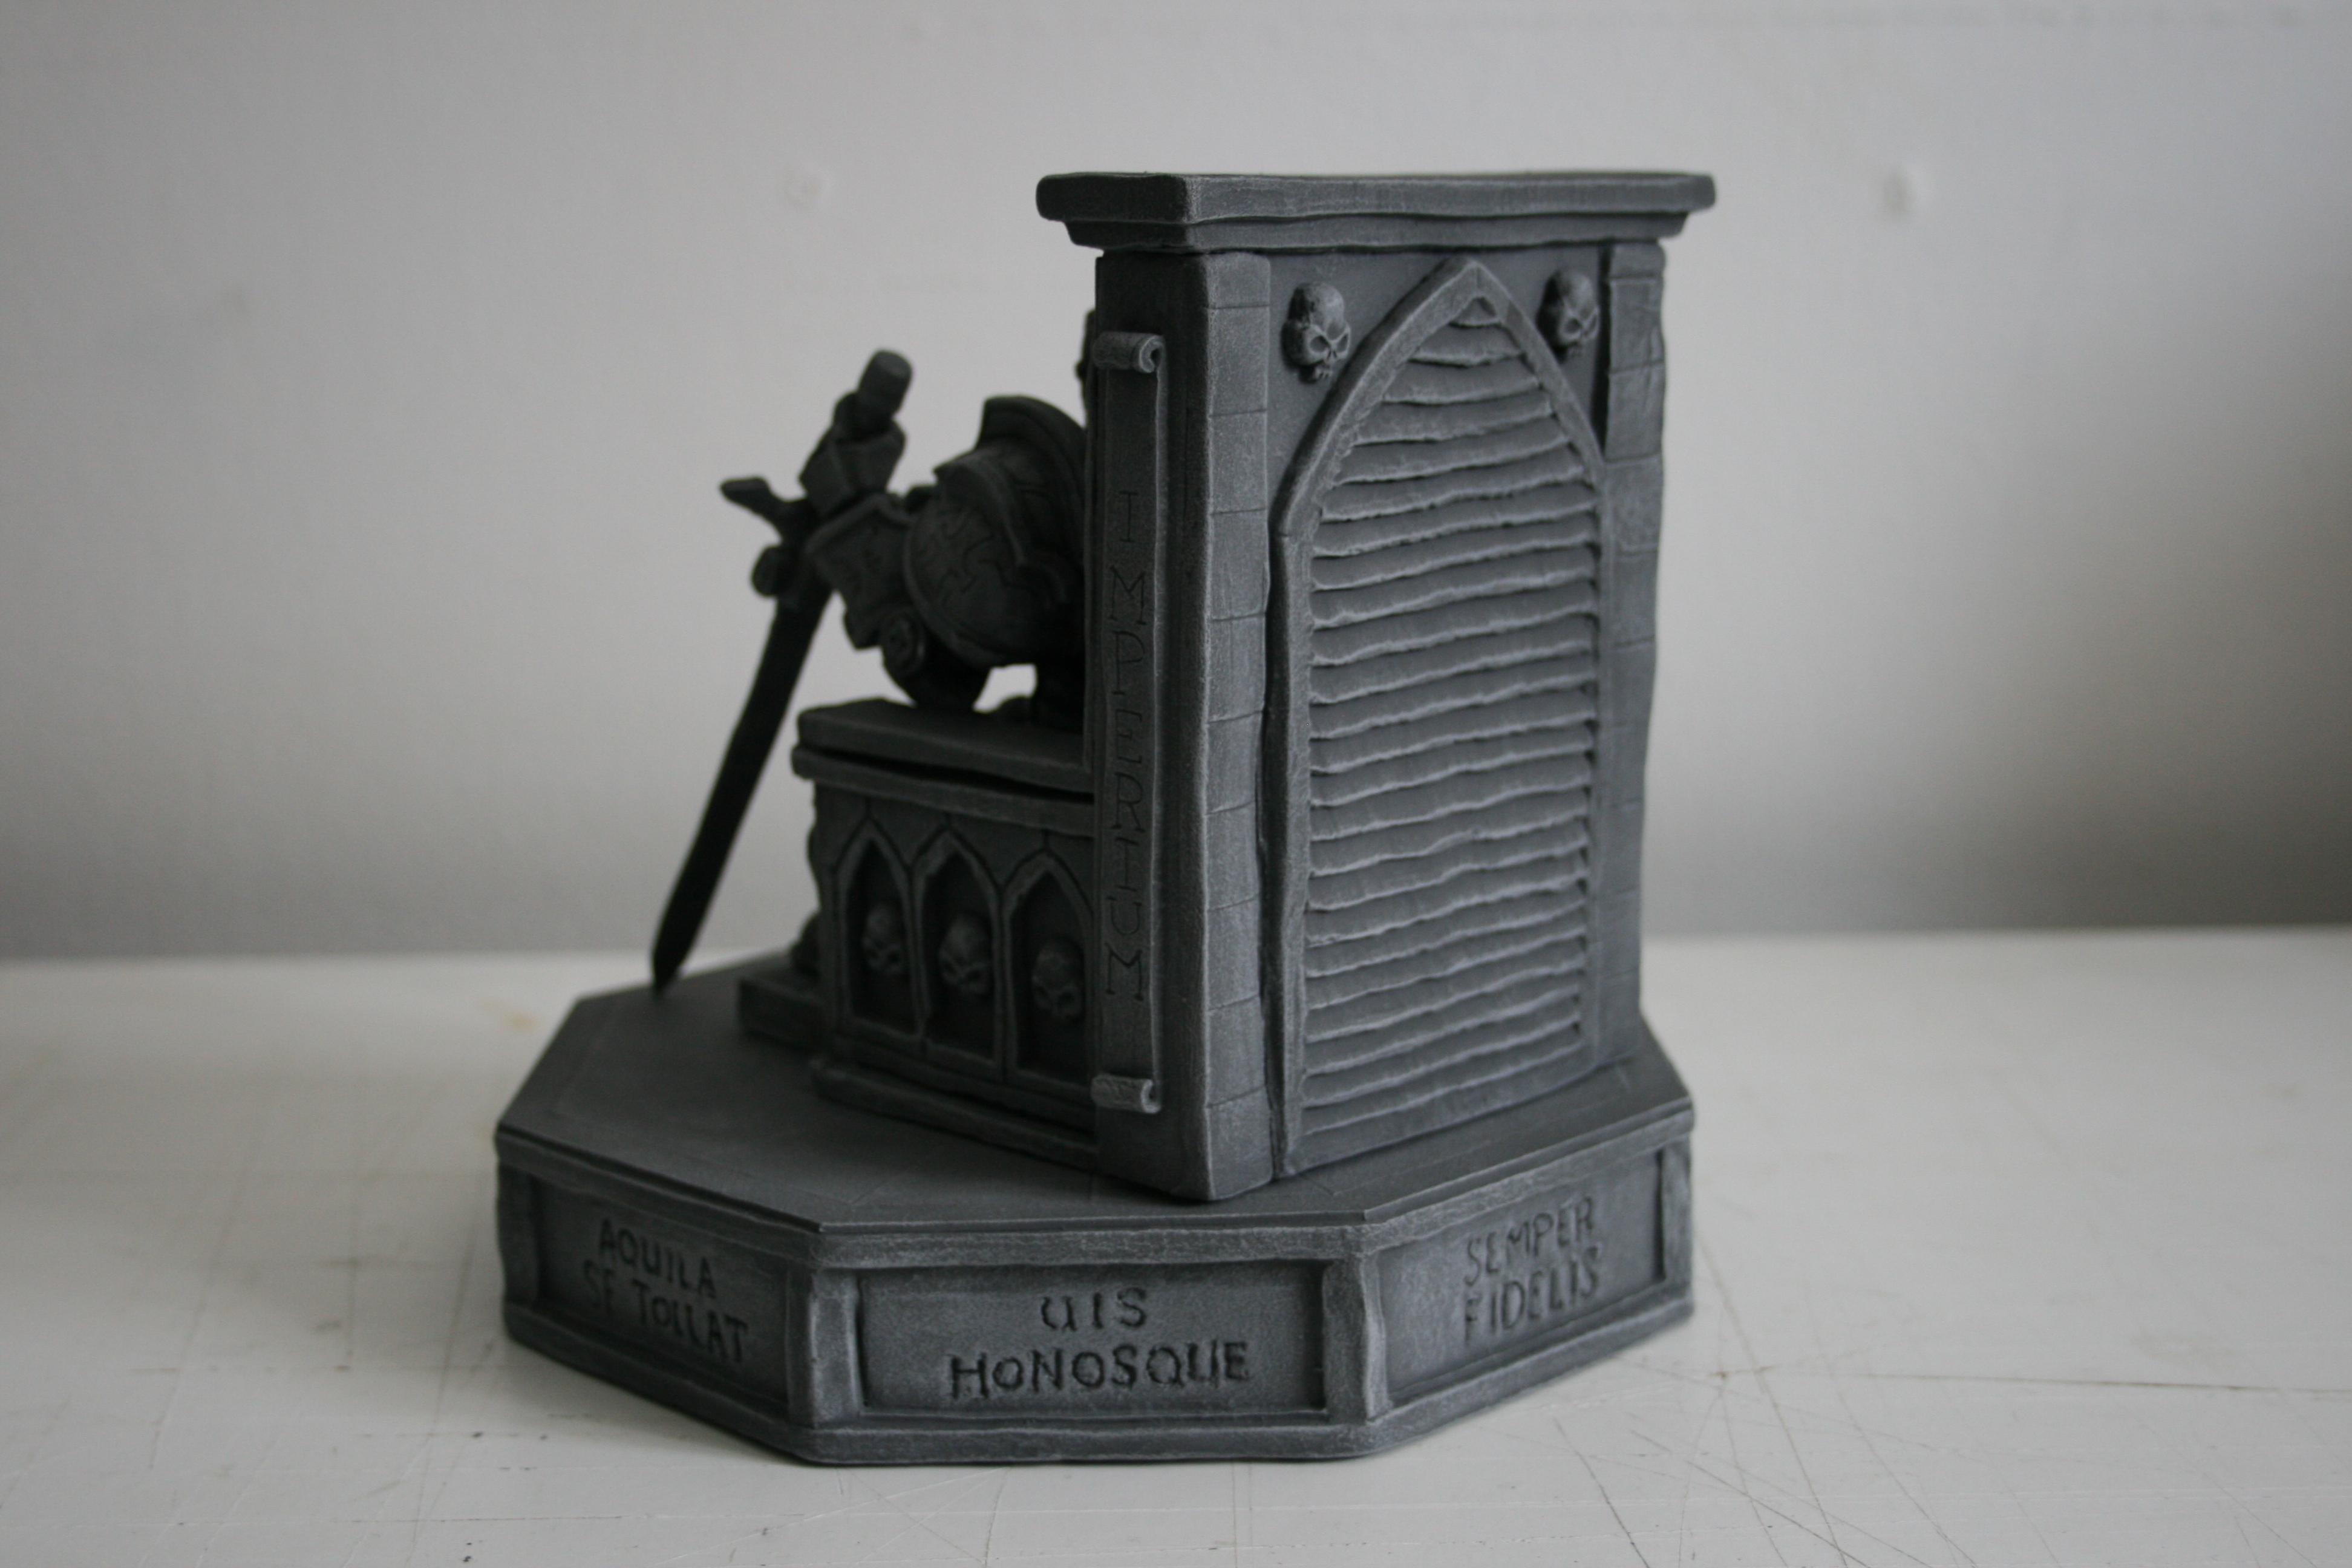 40k Inquisitor, Chaos, Chaos Lord, Chaos Space Marines, Imperial, Imperium, Inquisition, Inquisitor, Inquisitor Lord, Lord Inquisitor, Monument, Scatch Build, Scratch Build, Sculpting, Sculpture, Space Marines, Statue, Statues, Terrain, Warhammer 40,000, Warhammer Fantasy